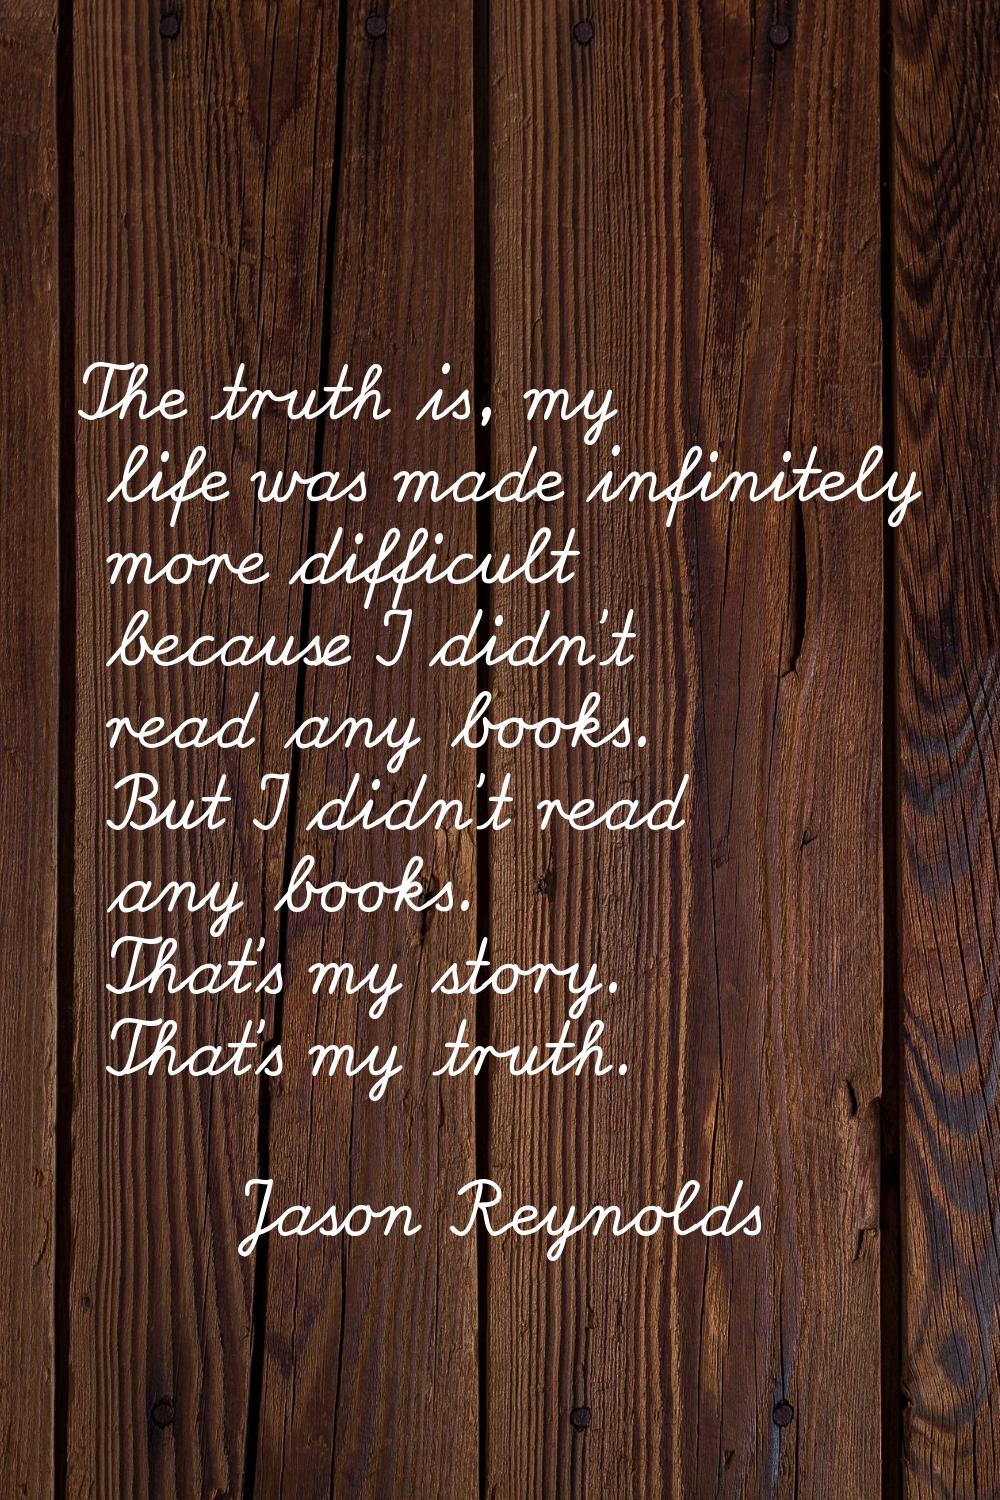 The truth is, my life was made infinitely more difficult because I didn't read any books. But I did